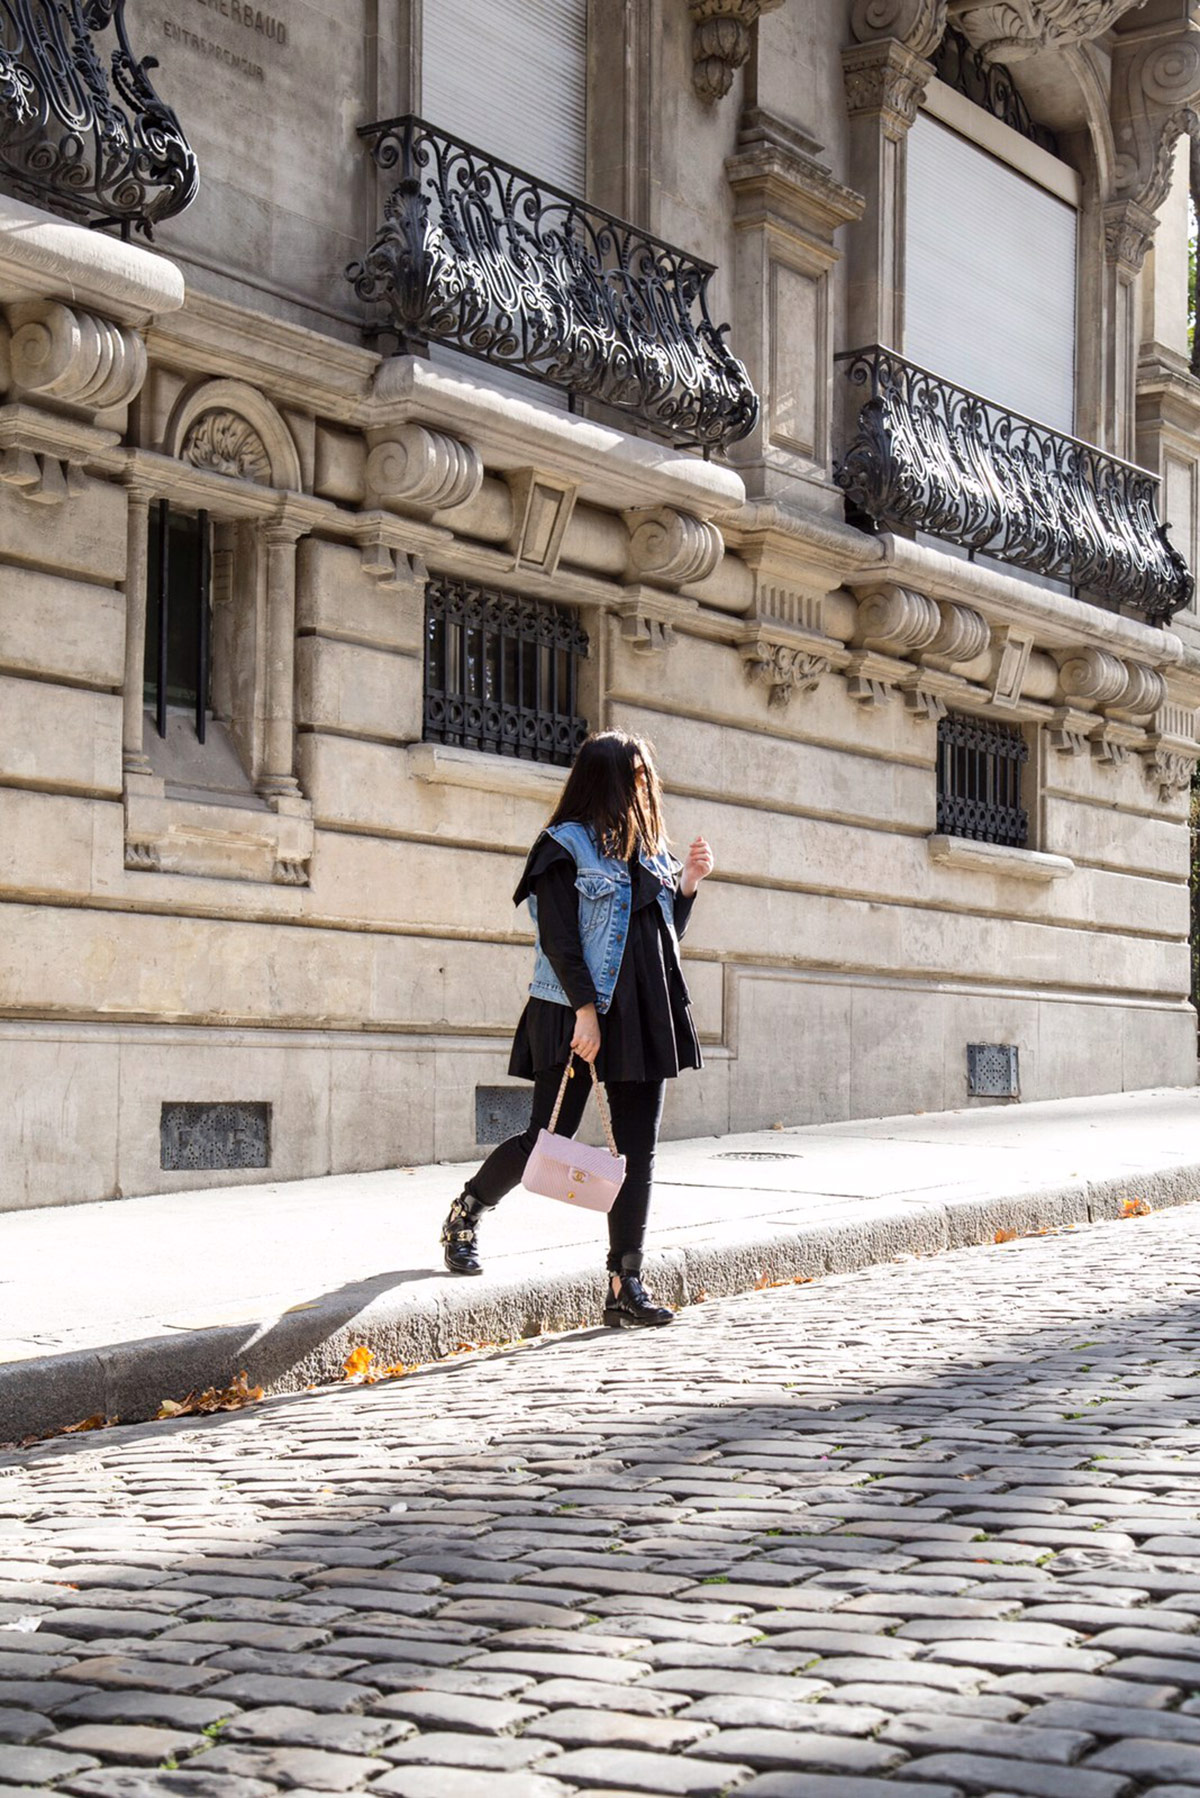 off-duty total black look with a pop of color by Stella Asteria - Lifestyle and Fashion Blogger - Paris Street Style inspiration, pregnancy style and how to dress the bump